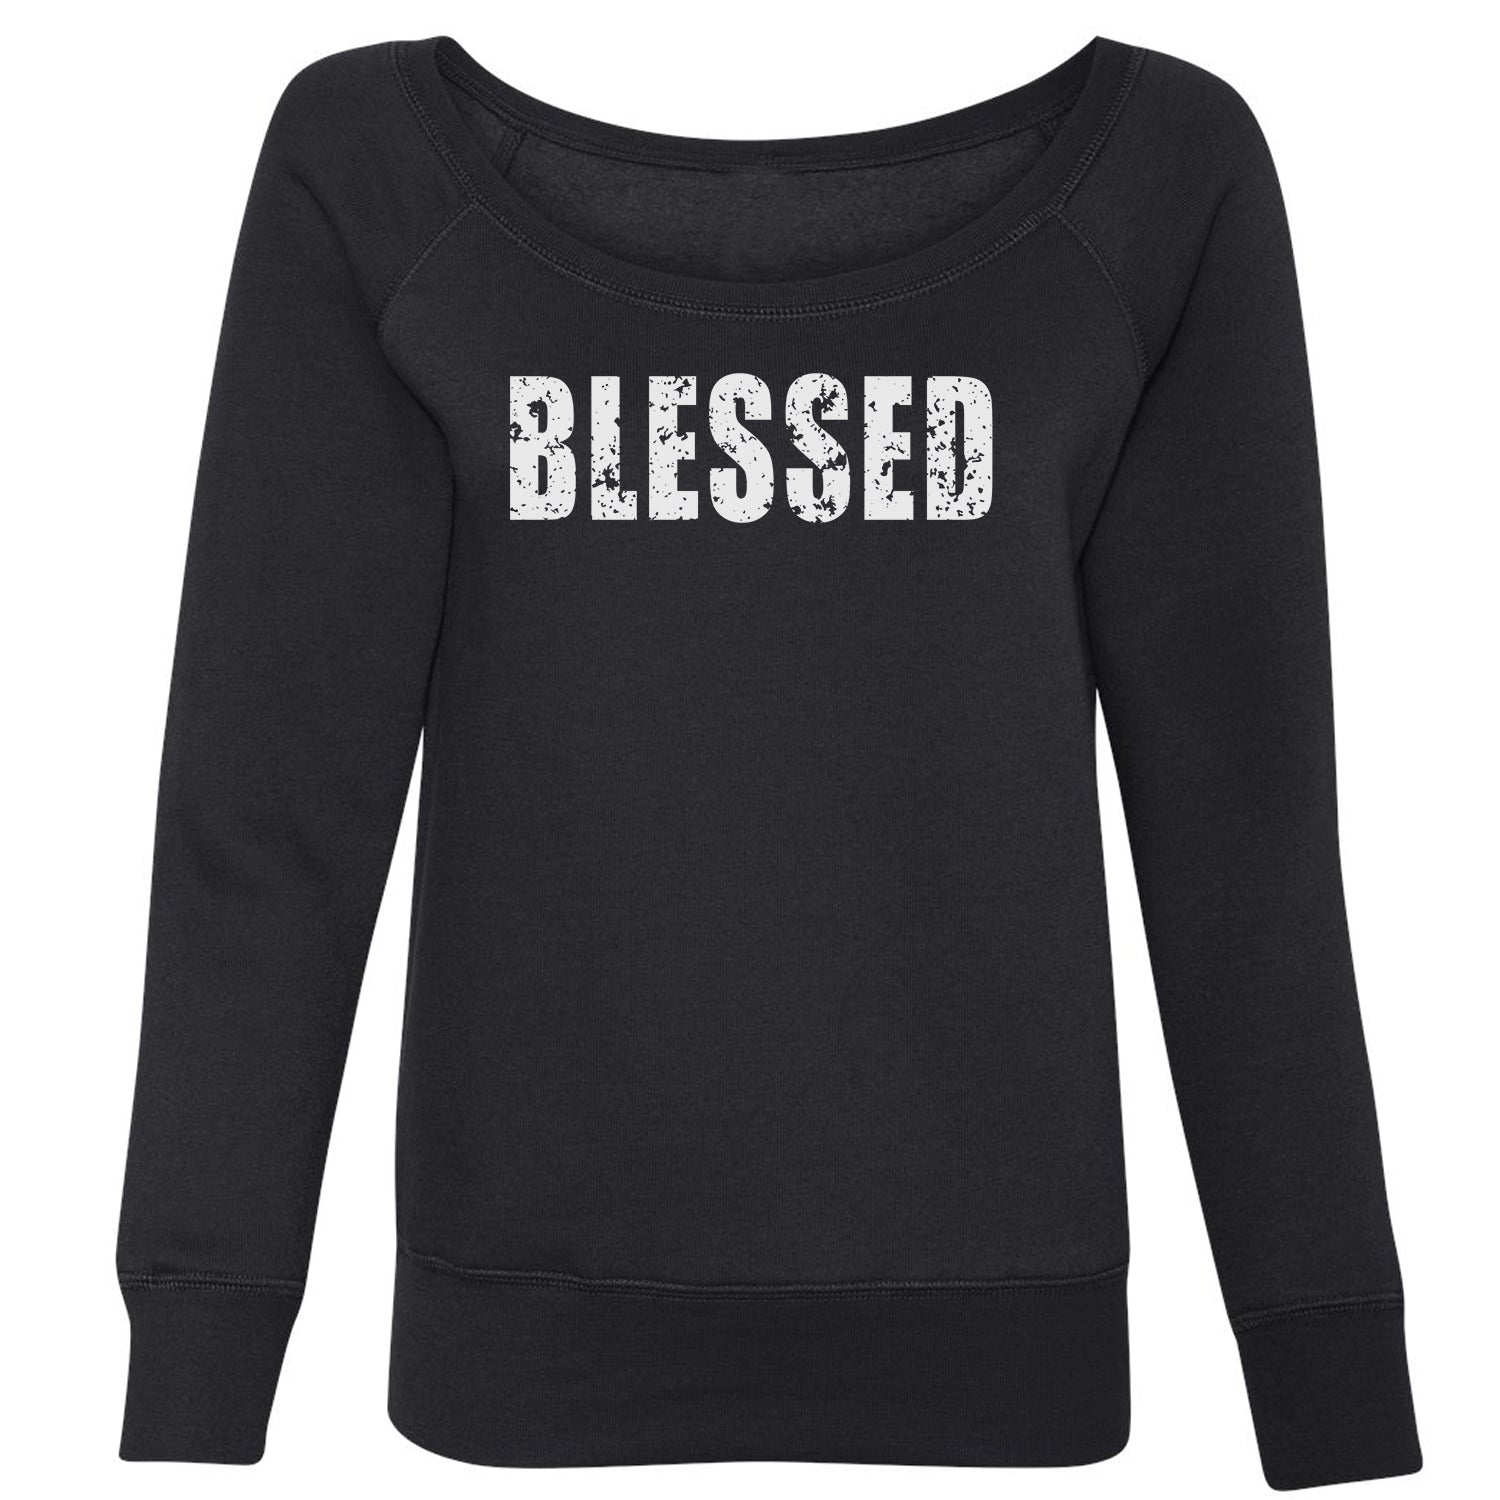 Blessed Religious Grateful Thankful Slouchy Off Shoulder Oversized Sweatshirt